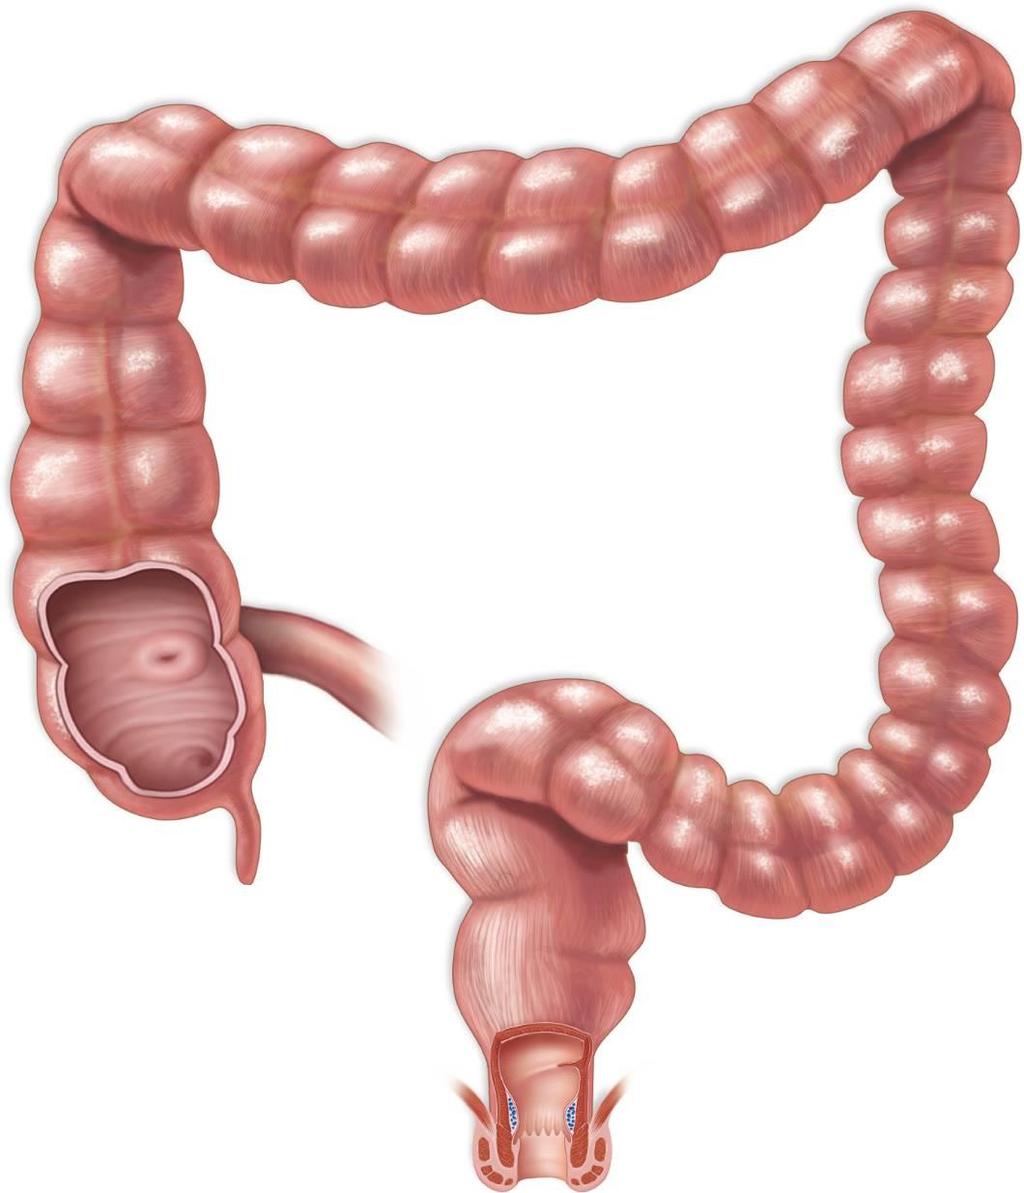 9.5 The Large Intestine and Defecation The large intestine Copyright The McGraw-Hill Companies, Inc. Permission required for reproduction or display.